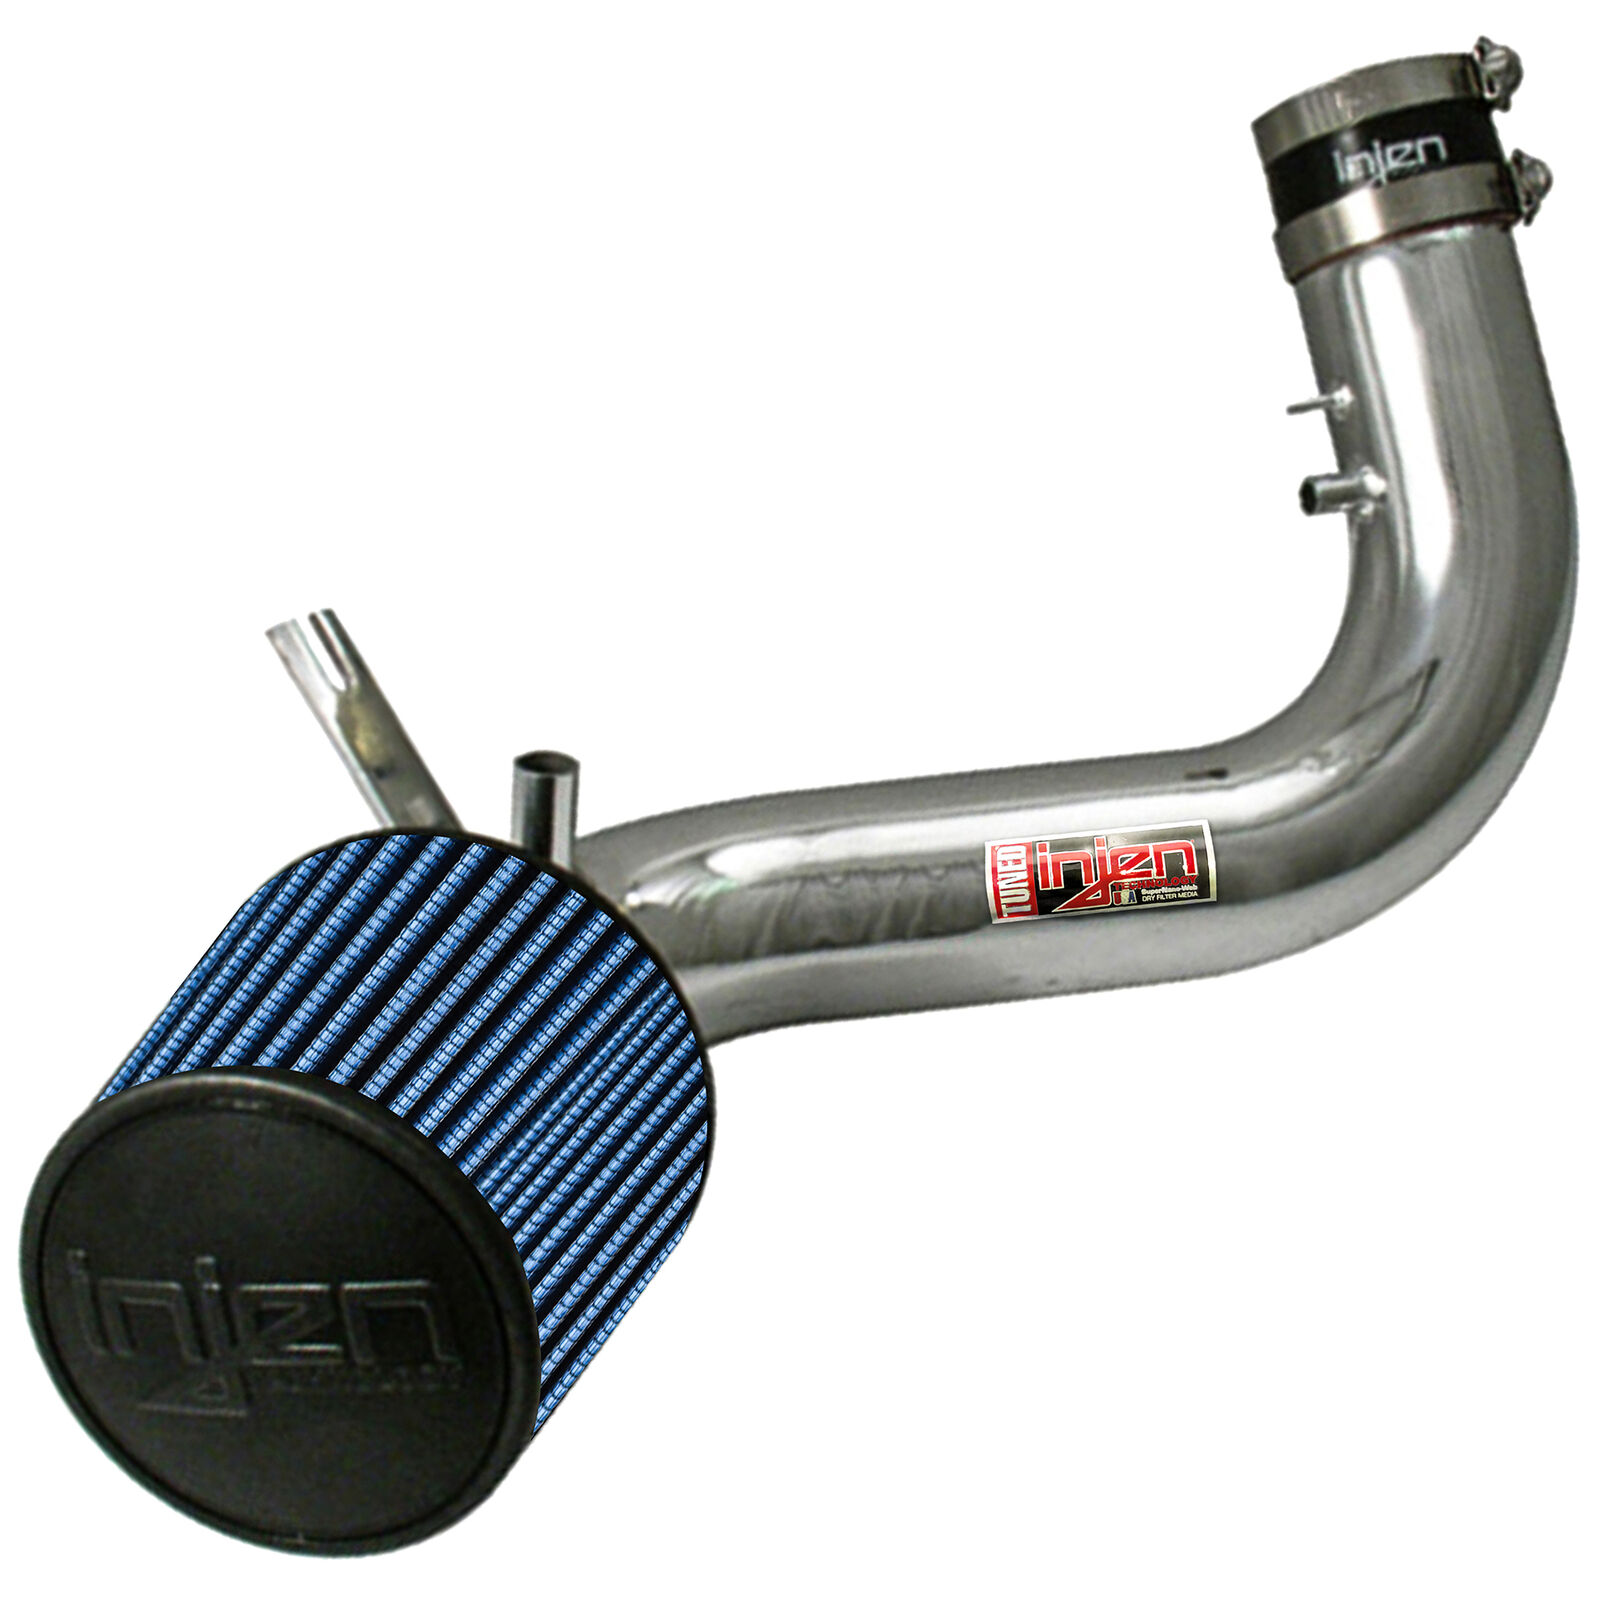 Injen IS1401P Aluminum Short Ram Cold Air Intake for 1991-1995 Acura Legend 3.2L